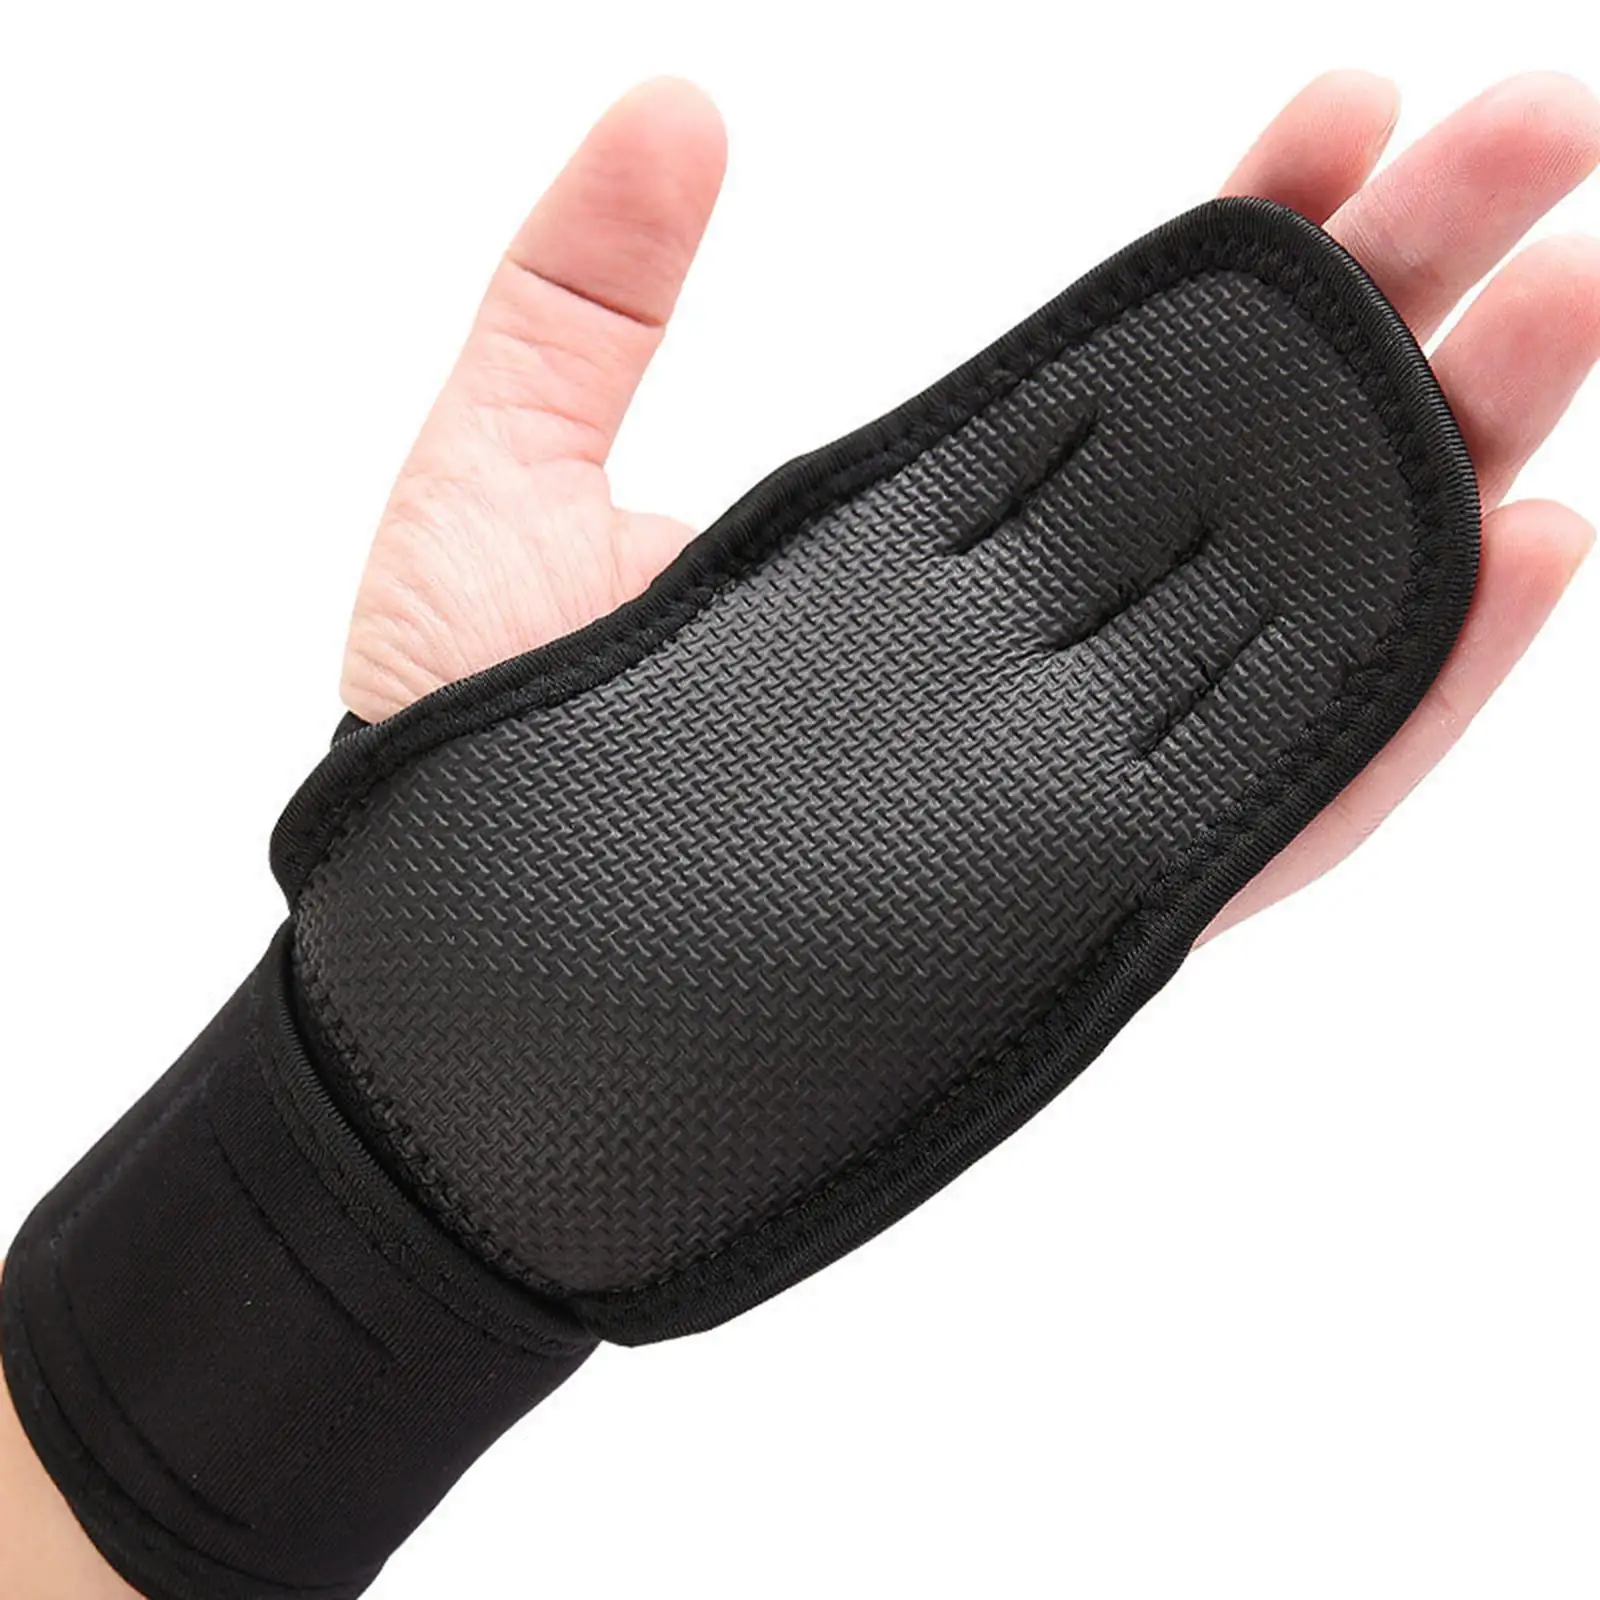 Lifting Wrist Support Wraps Premium Hand Grips for Powerlifting Exercise Gym